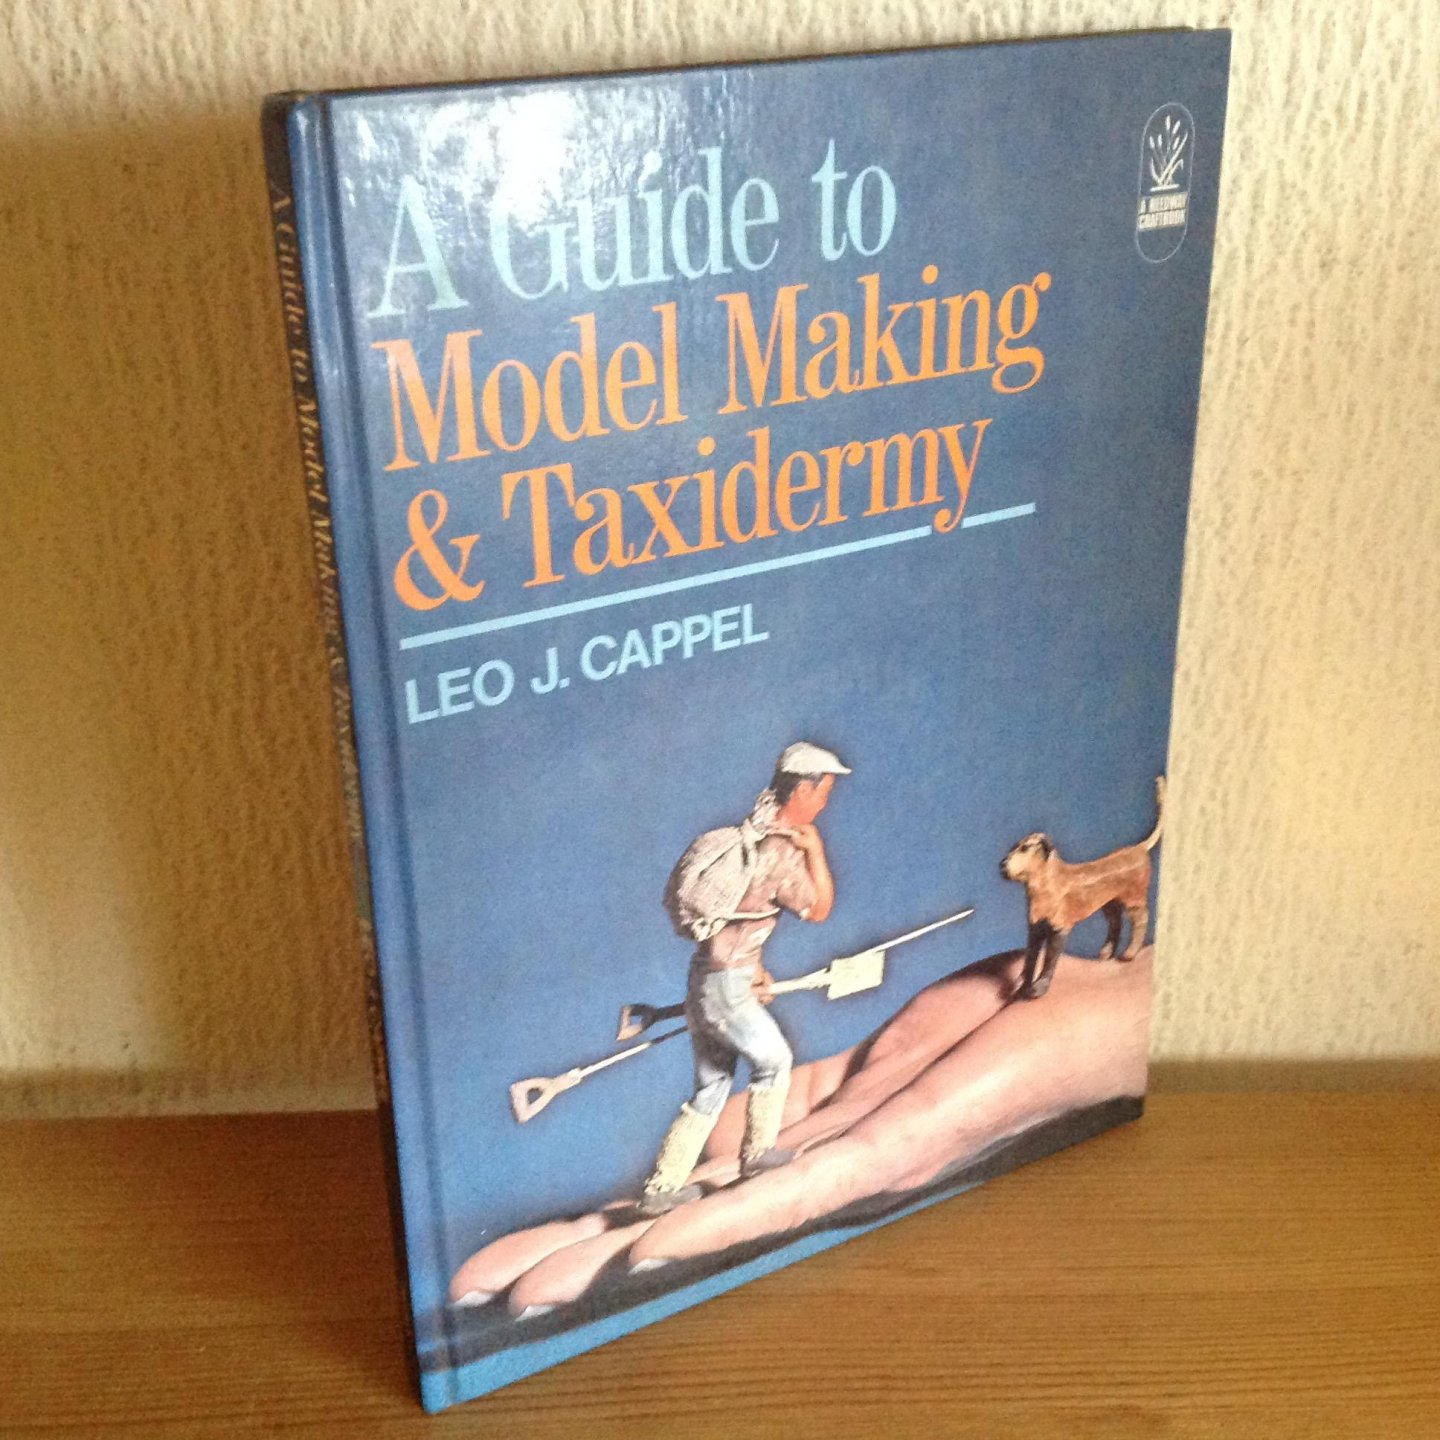 Leo j Cappel - A Guide to MODEL MAKING & TAXIDERMY